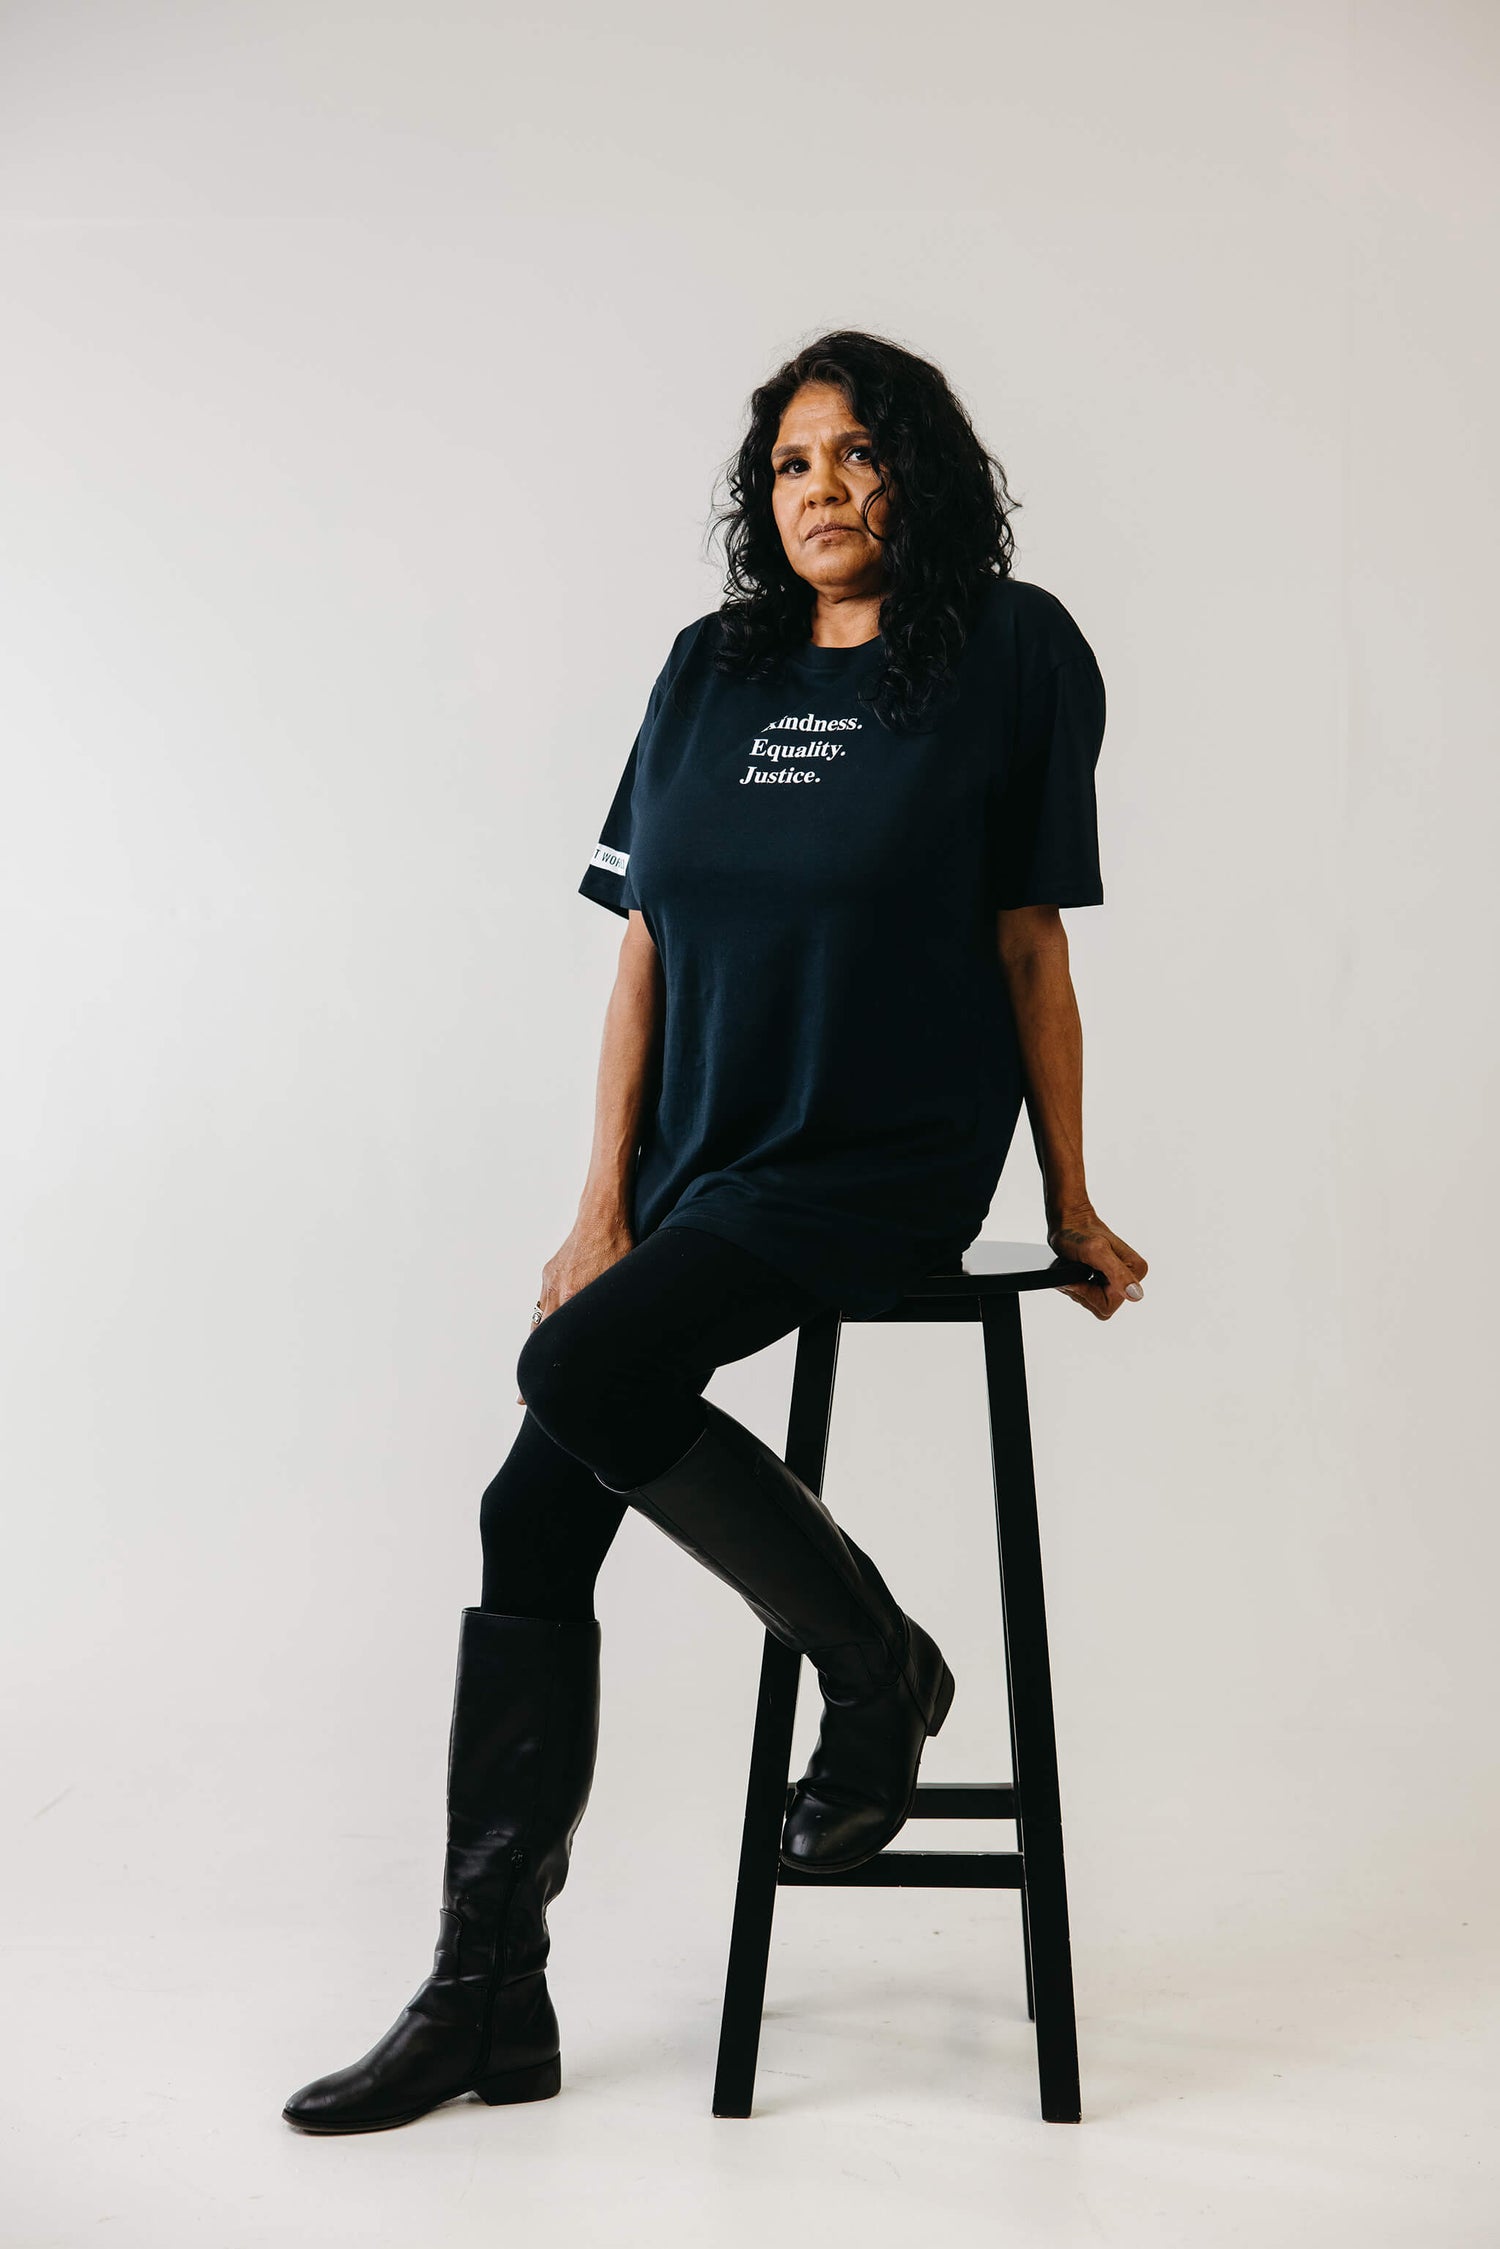 Dell sitting on a stool wearing an ink blue tshirt with the words 'Kindness Equality Justice.' written in white.